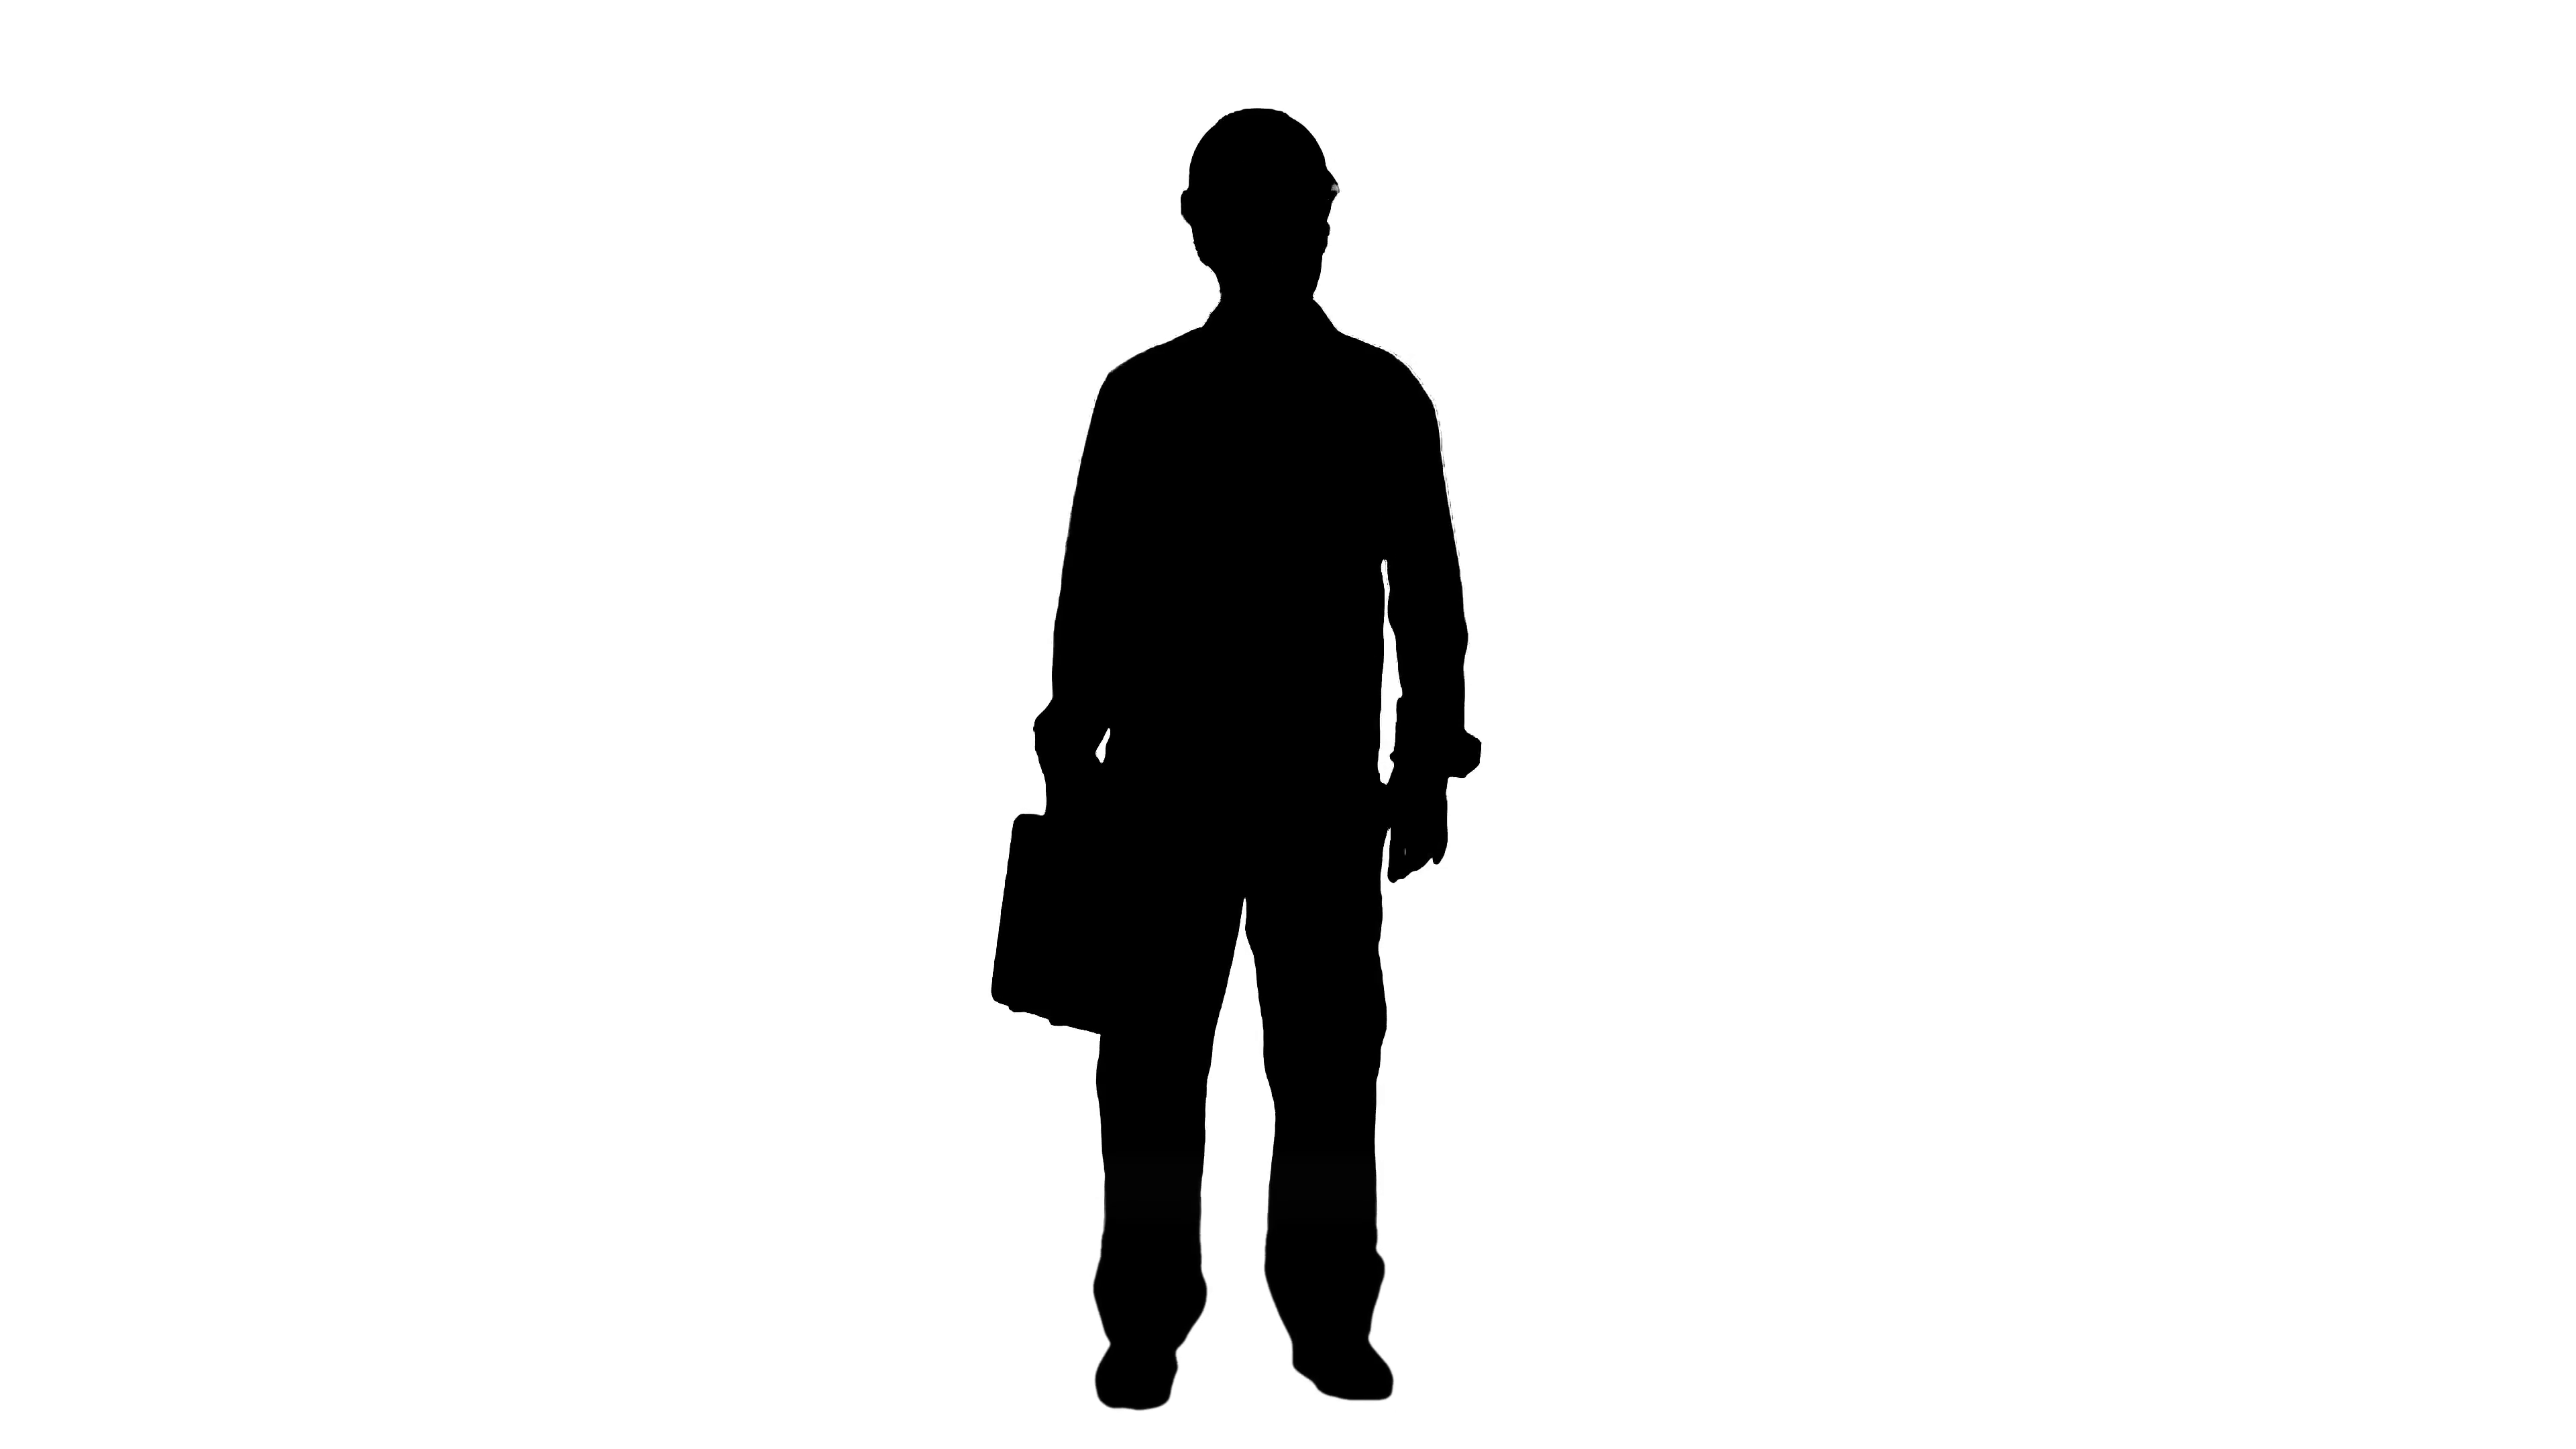 23. Found. silhouette images for 'Handyman'. 